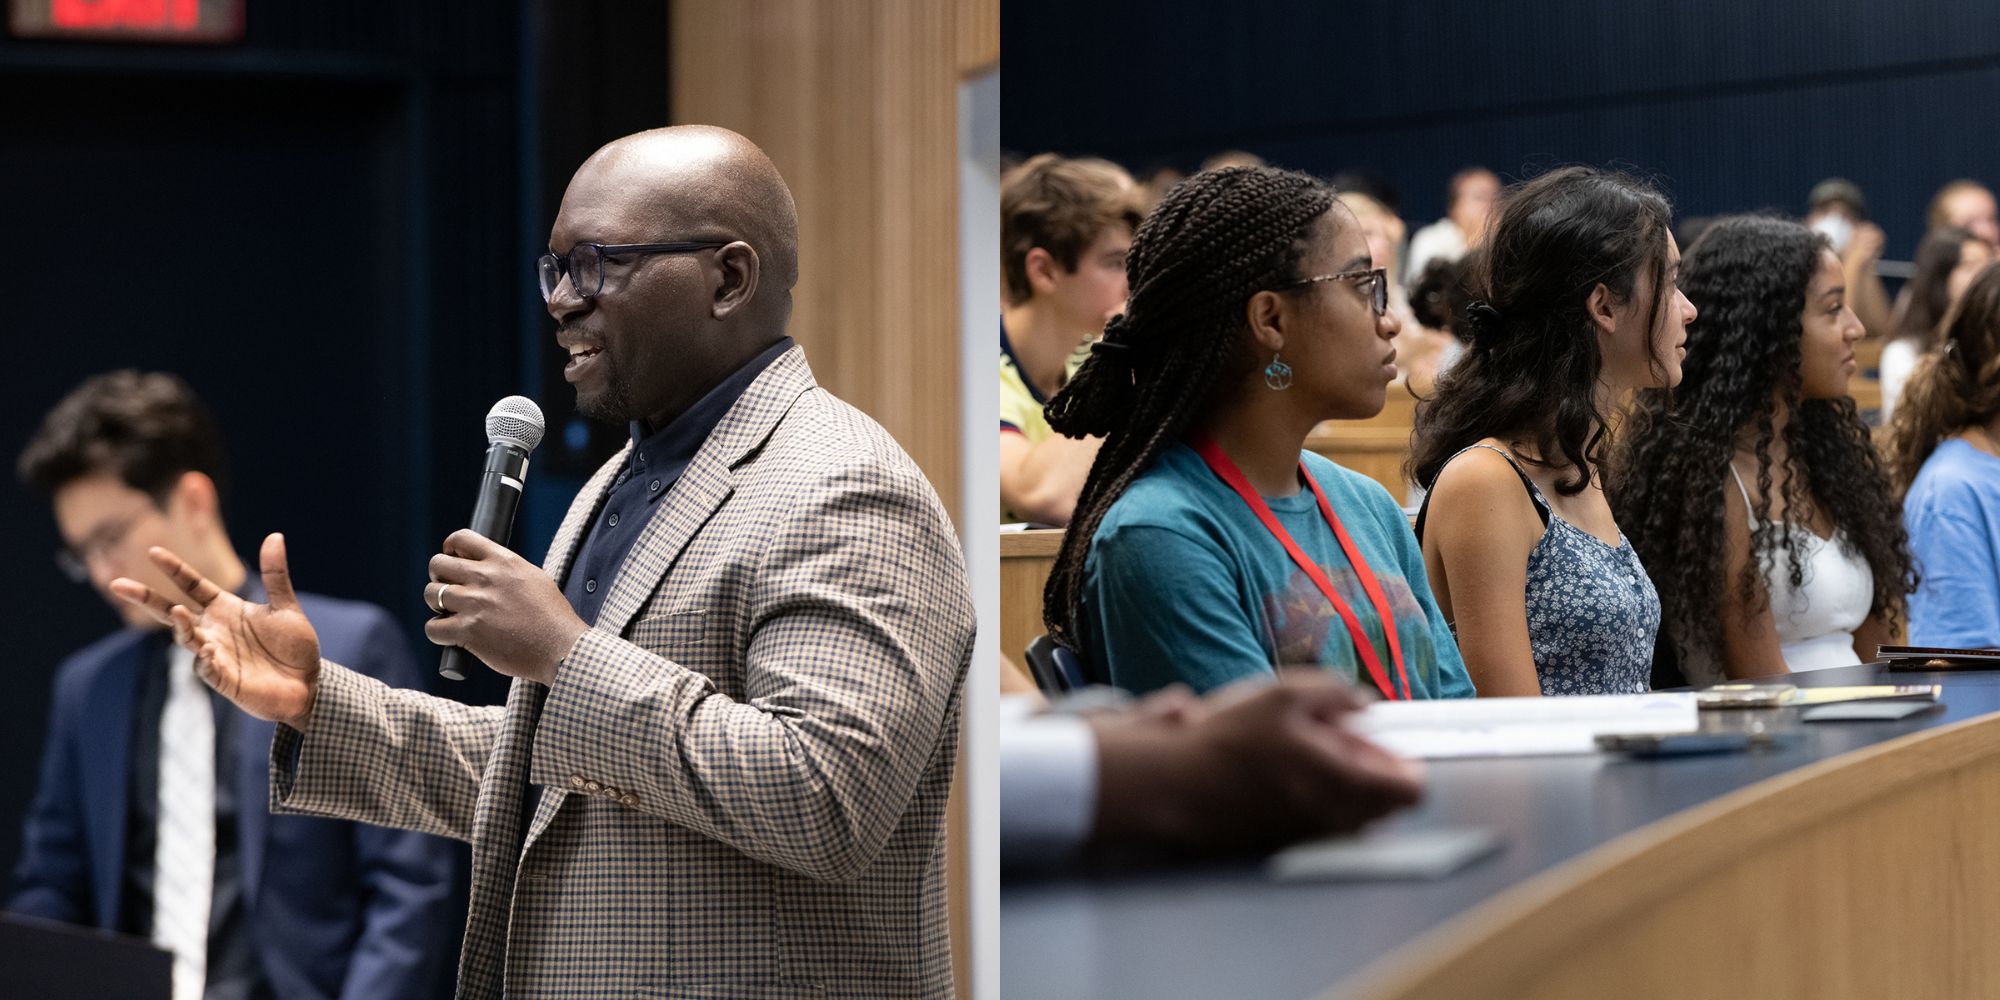 Left: Jamelle Bouie speaking into a microphone. Right: Audience members listening.